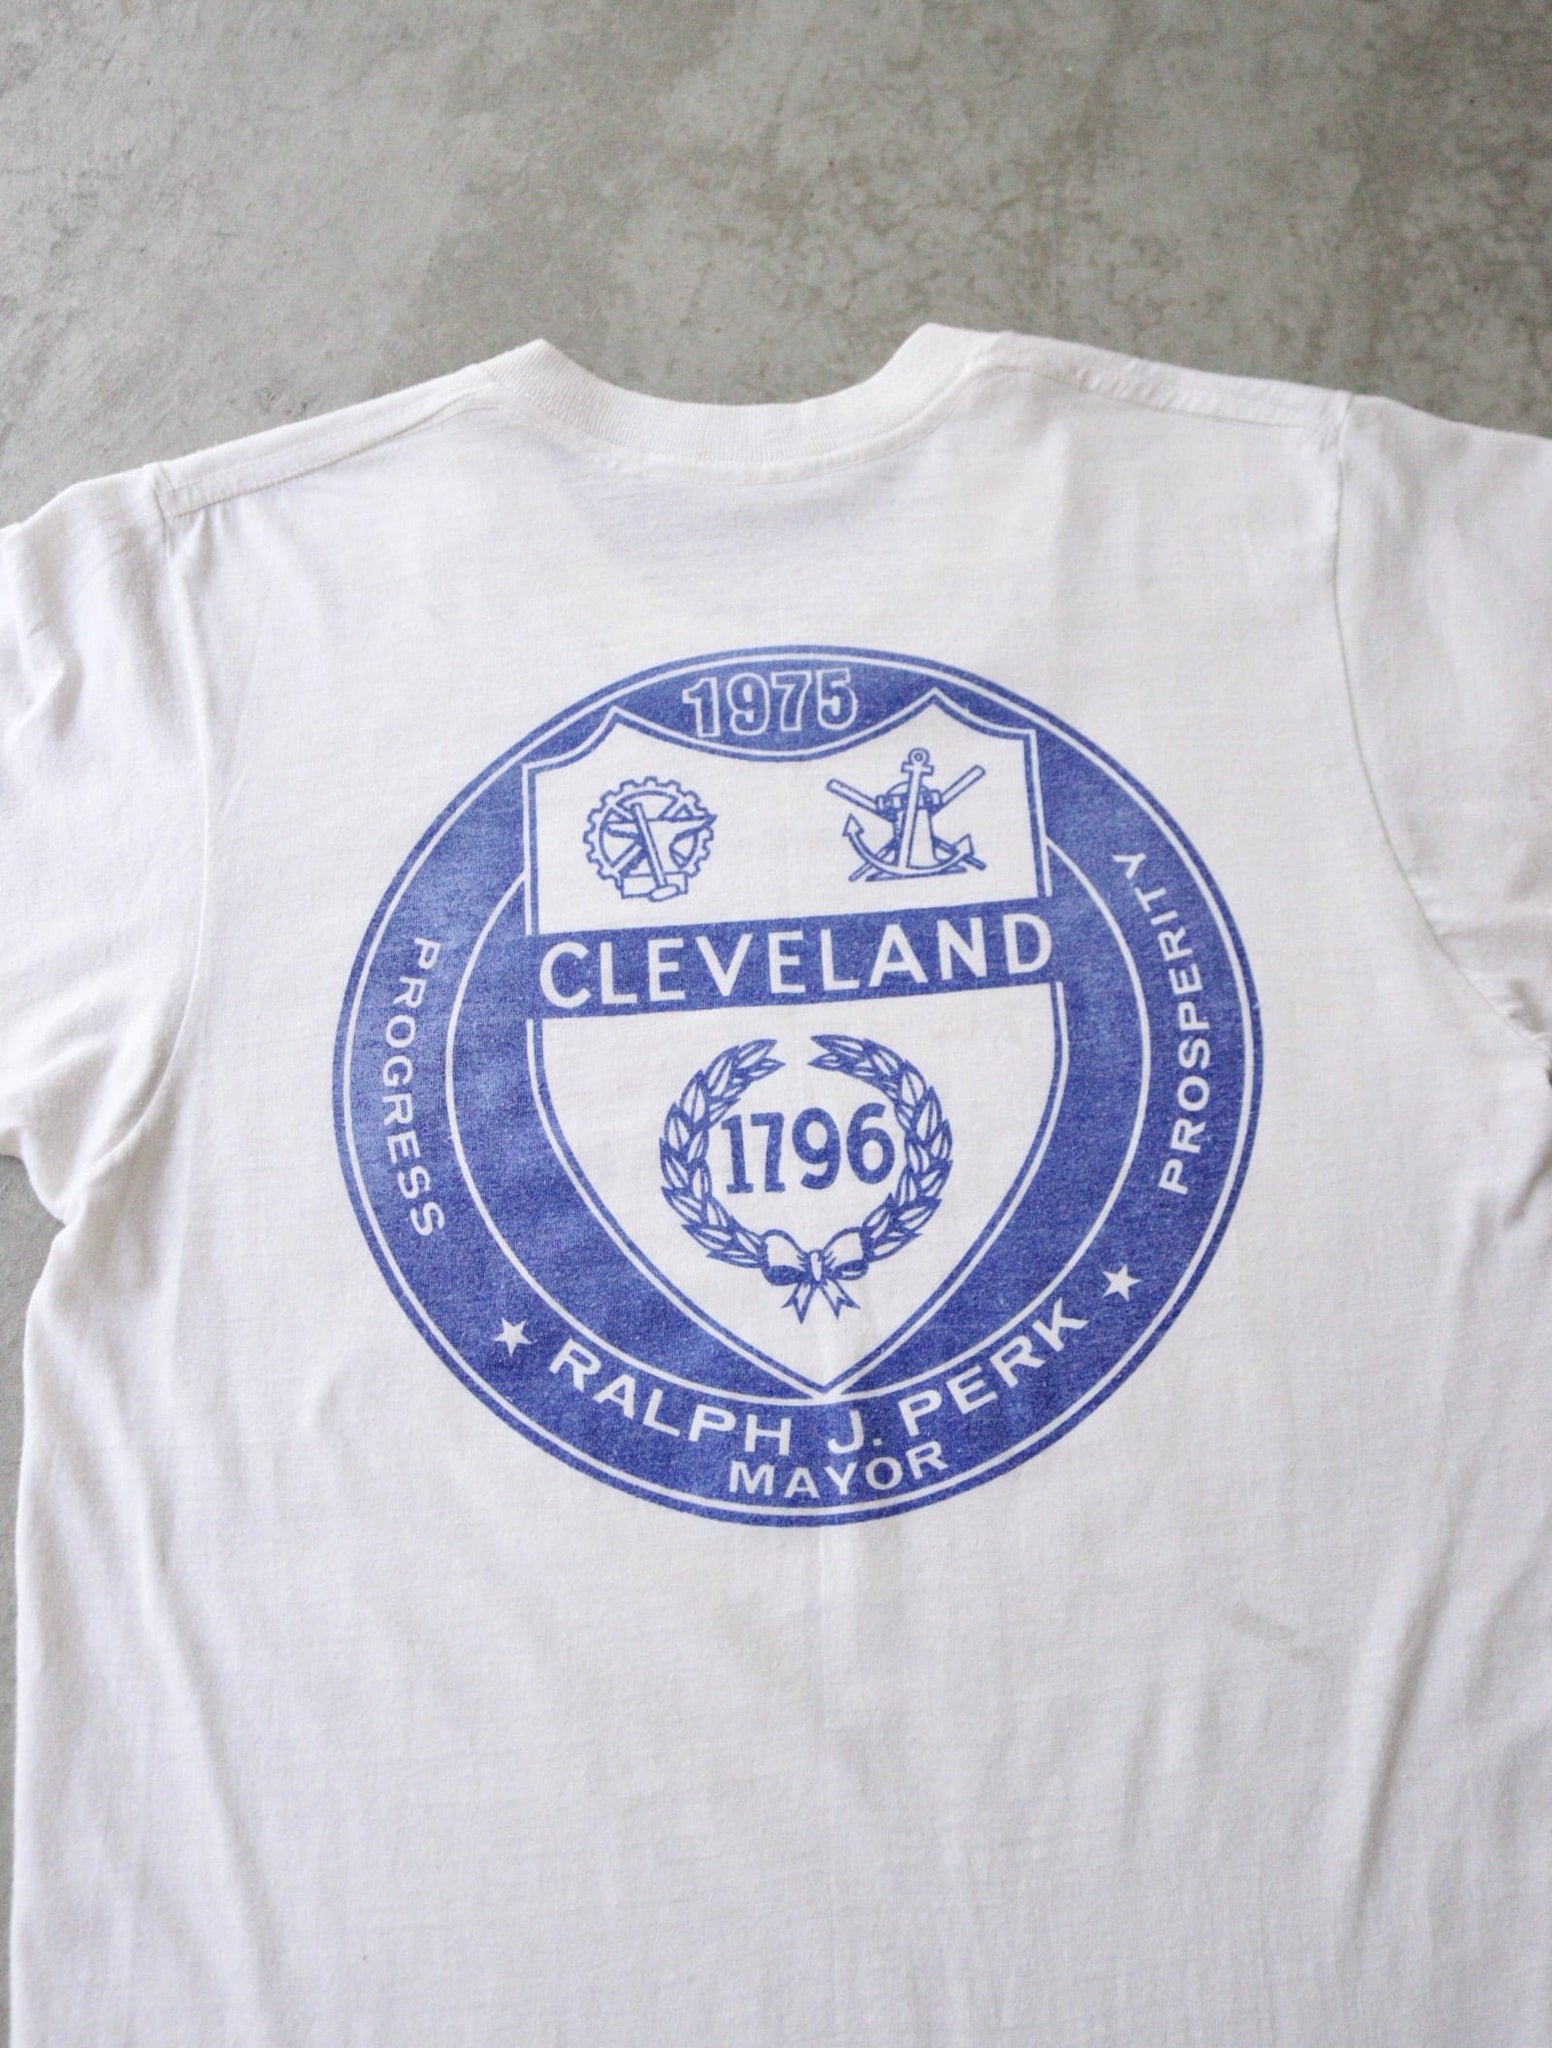 1970S YOUTH SERVICES TEE